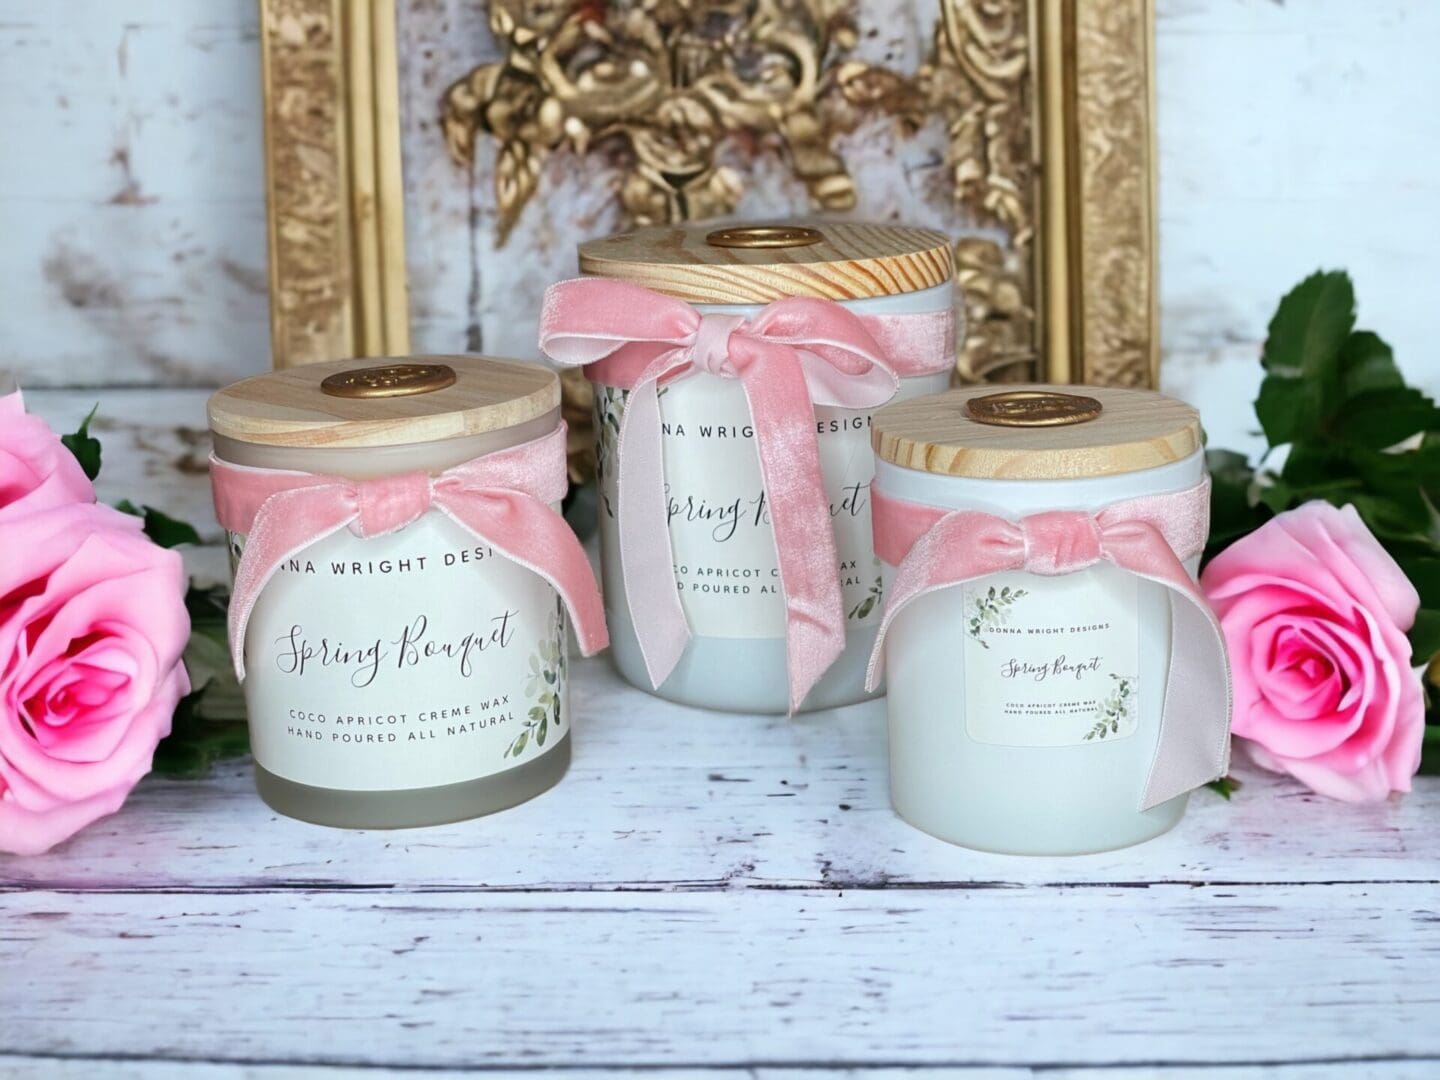 Donna Wright Designs Three elegant "Spring Bouquet Candles" with pale pink ribbons and rose decorations, labeled "Spring Bouquet Candles," set against a rustic wooden background with golden ornate frames.